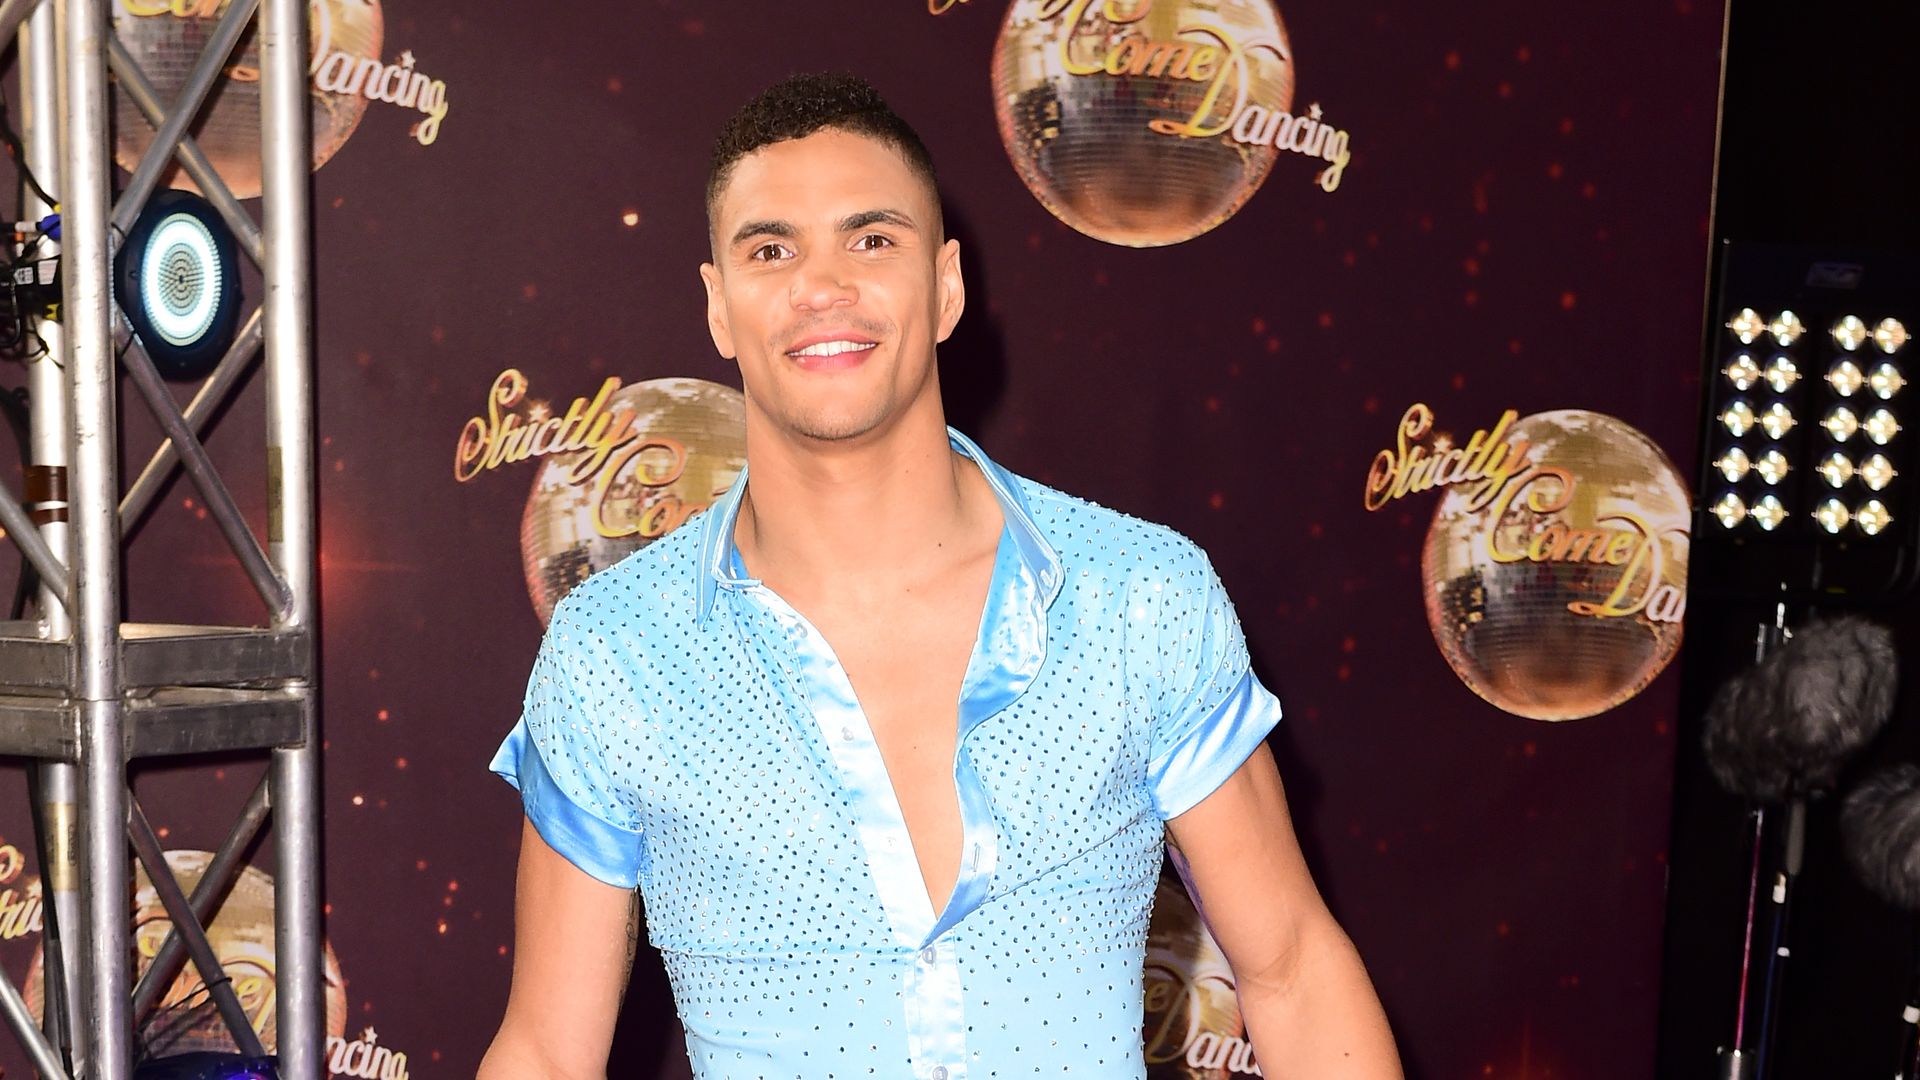 Ex-Olympic star tells of 'frustrating' experience on Strictly amid controversy engulfing show